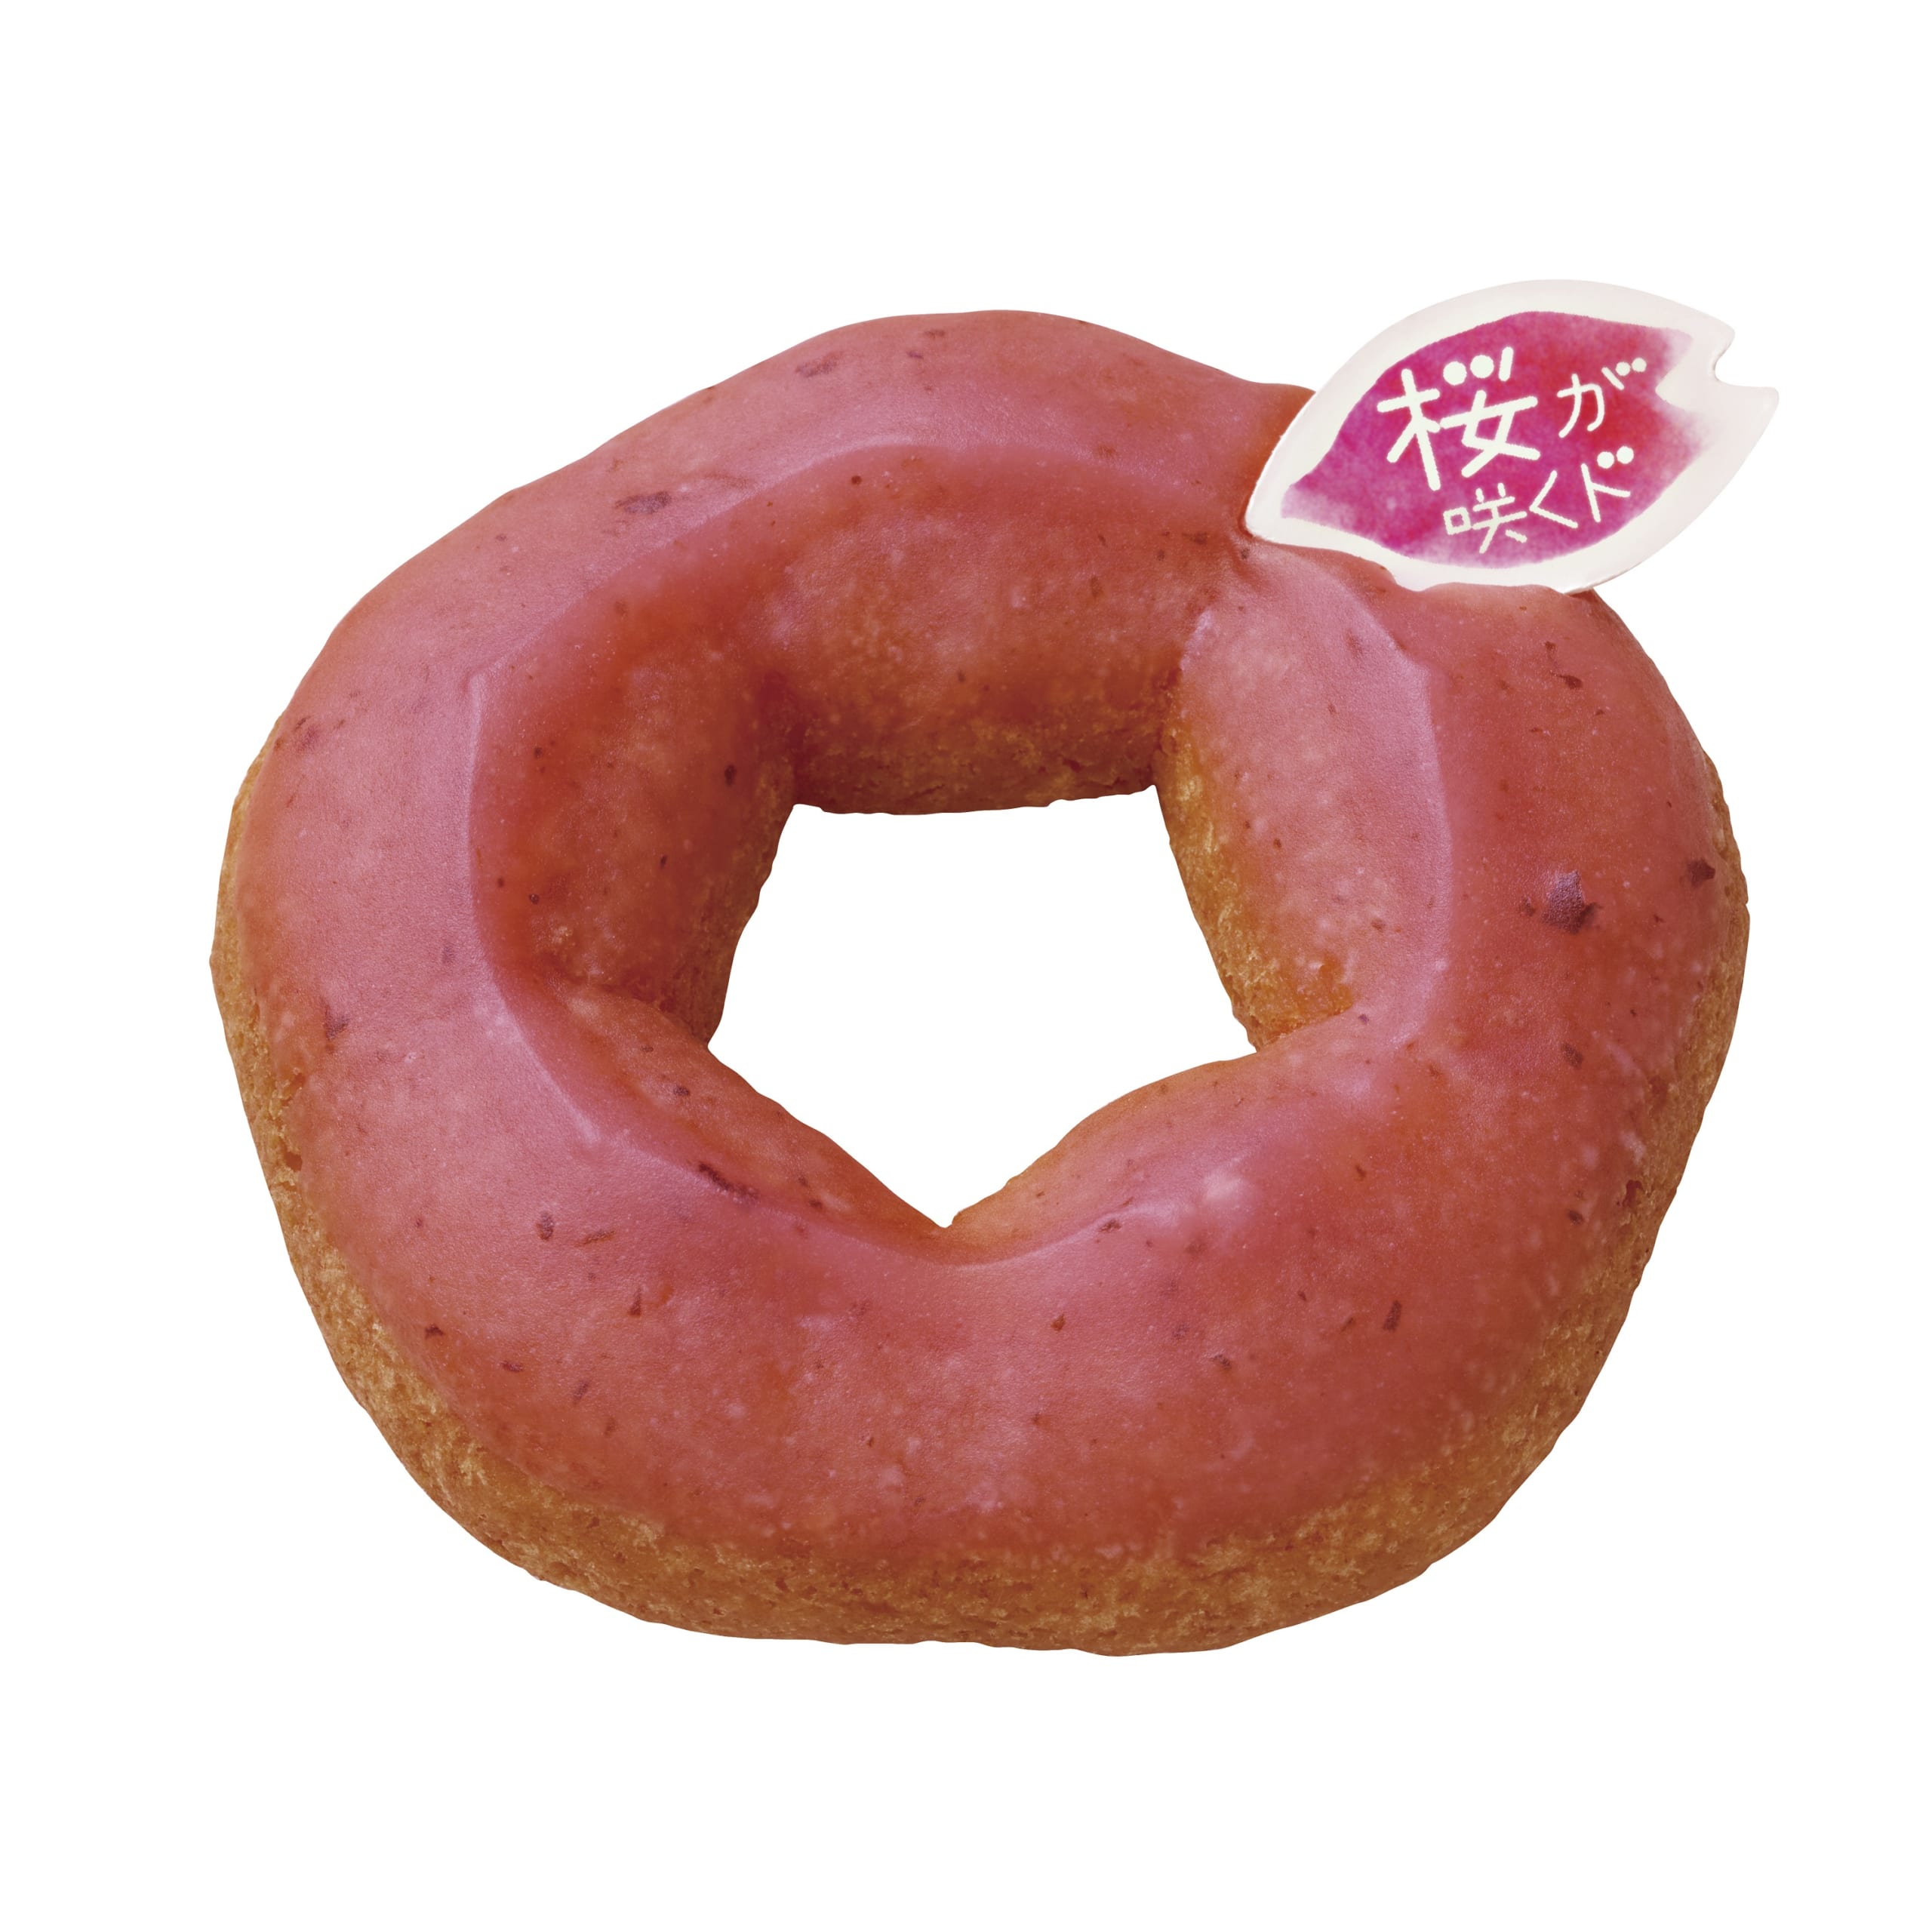 Mister Donut Cherry Blossom Collection